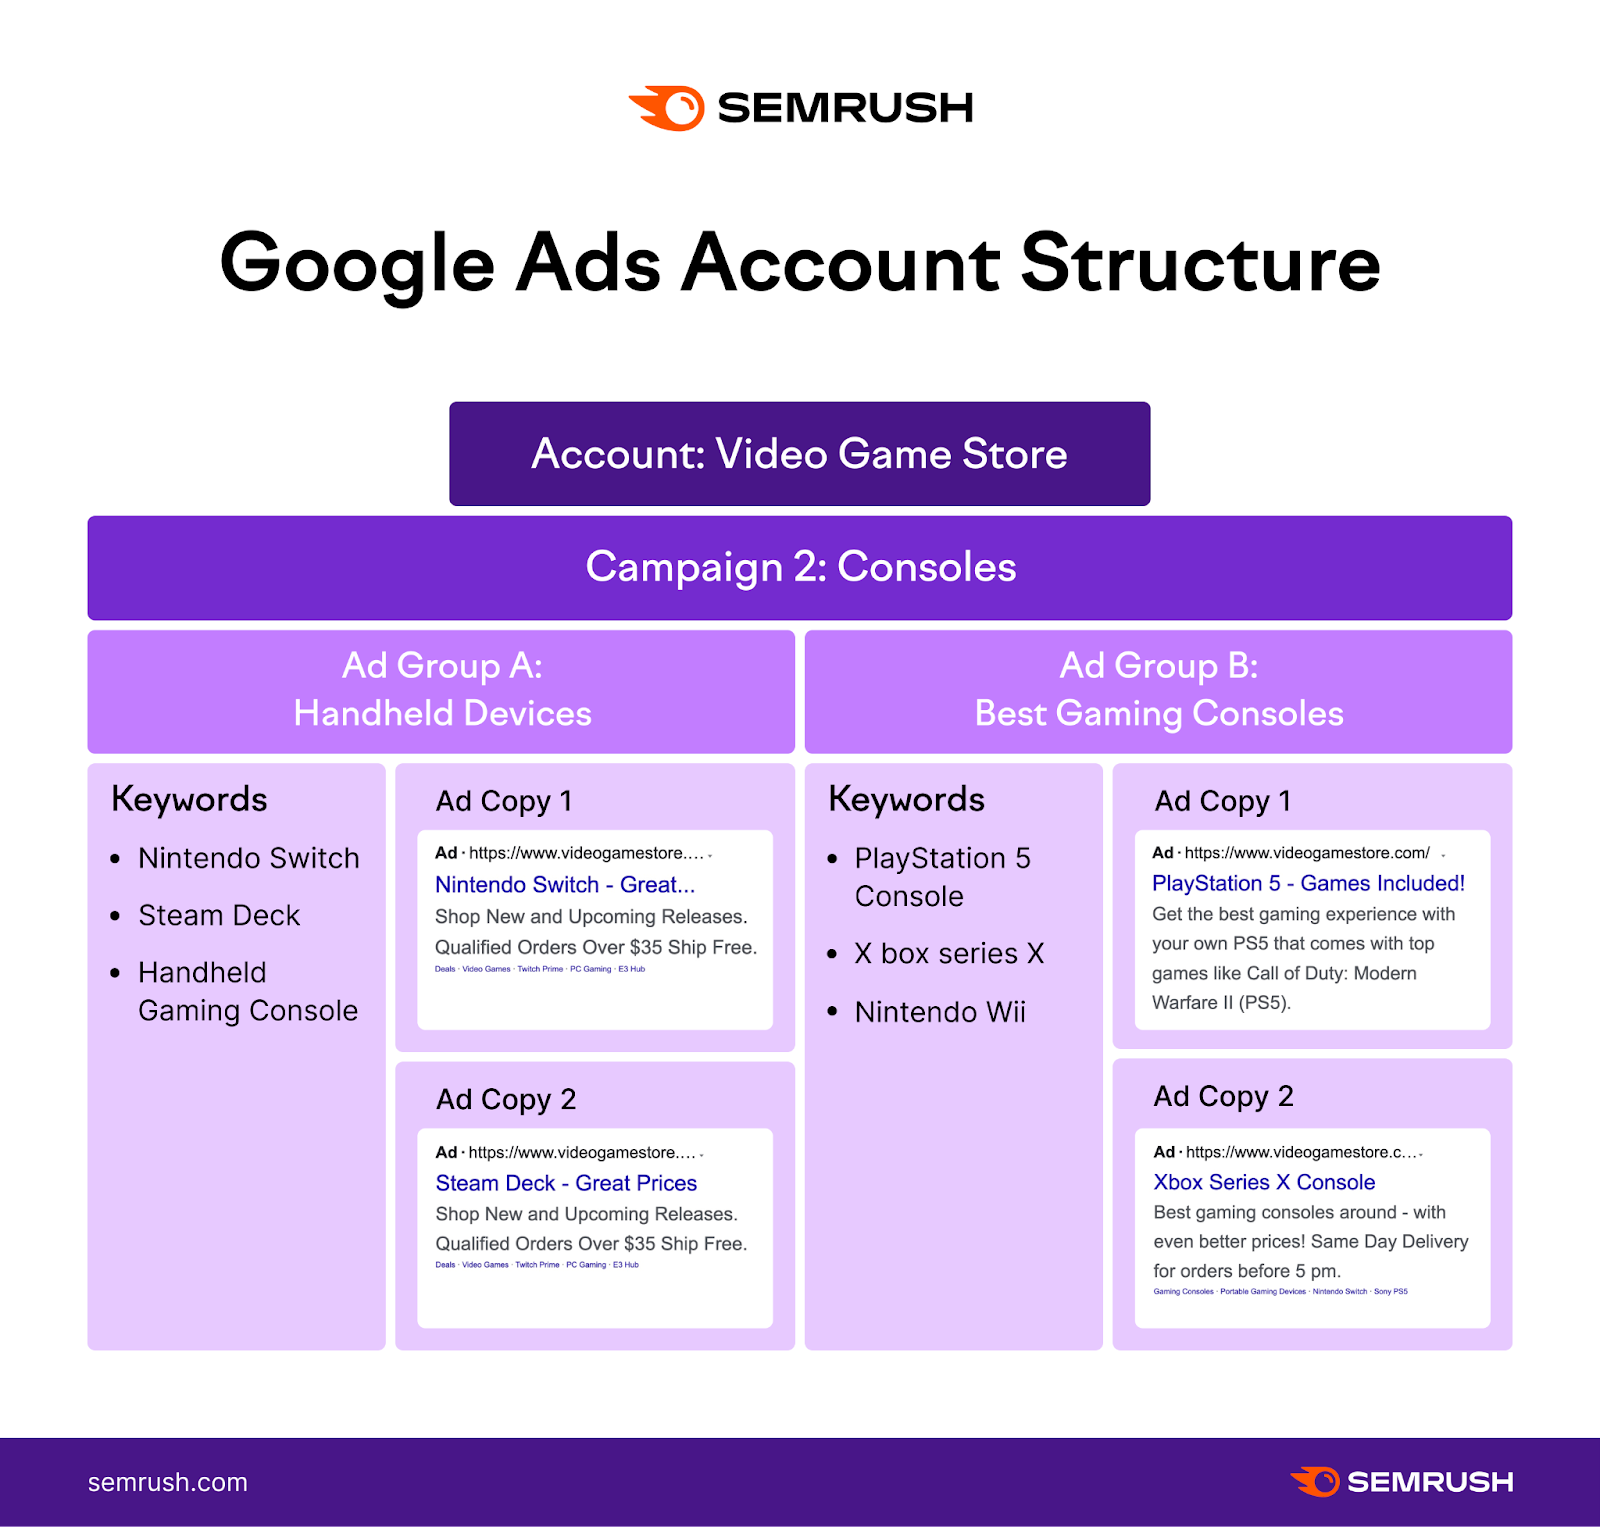 Color-coded, two-column diagram explaining the structure of a Google Ads account for a "Video Game Store," with examples.